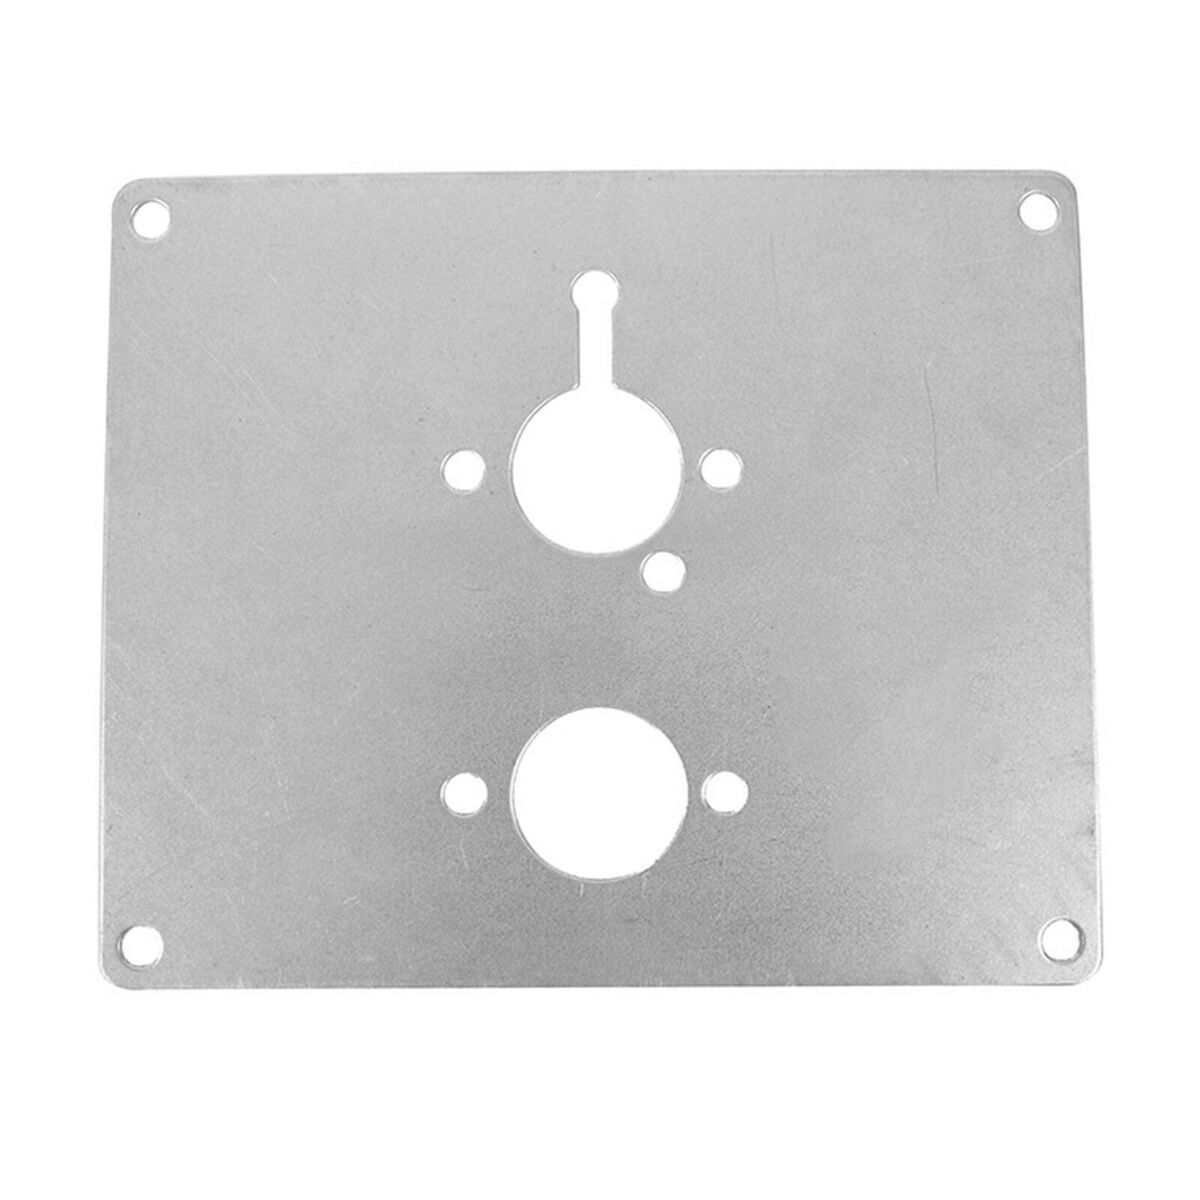 ( ON HOLD ) Diesel heater FLAT mounting plate